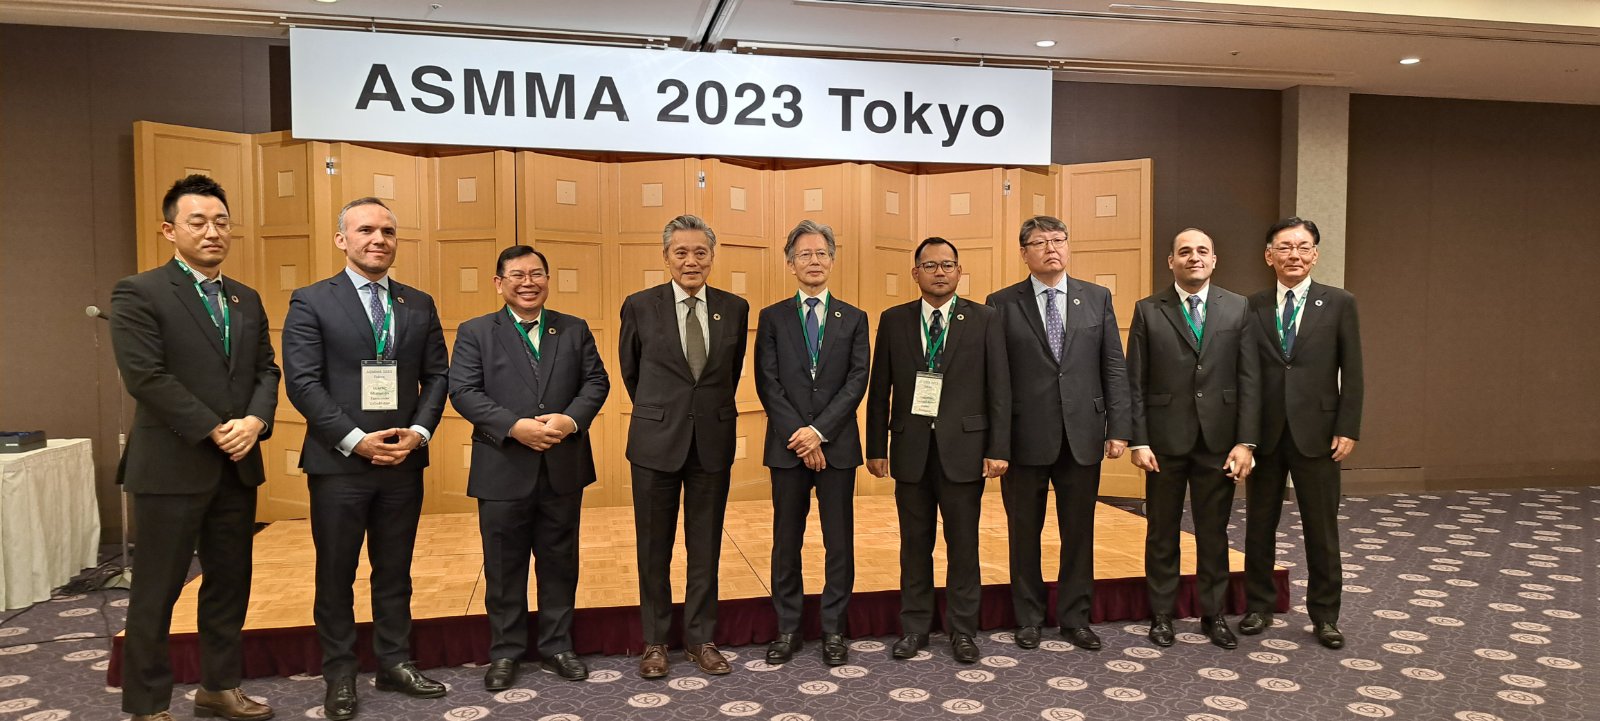 Leaders of ASMMA gather at the 9th Annual Meeting of ASMMA and Green Housing Finance